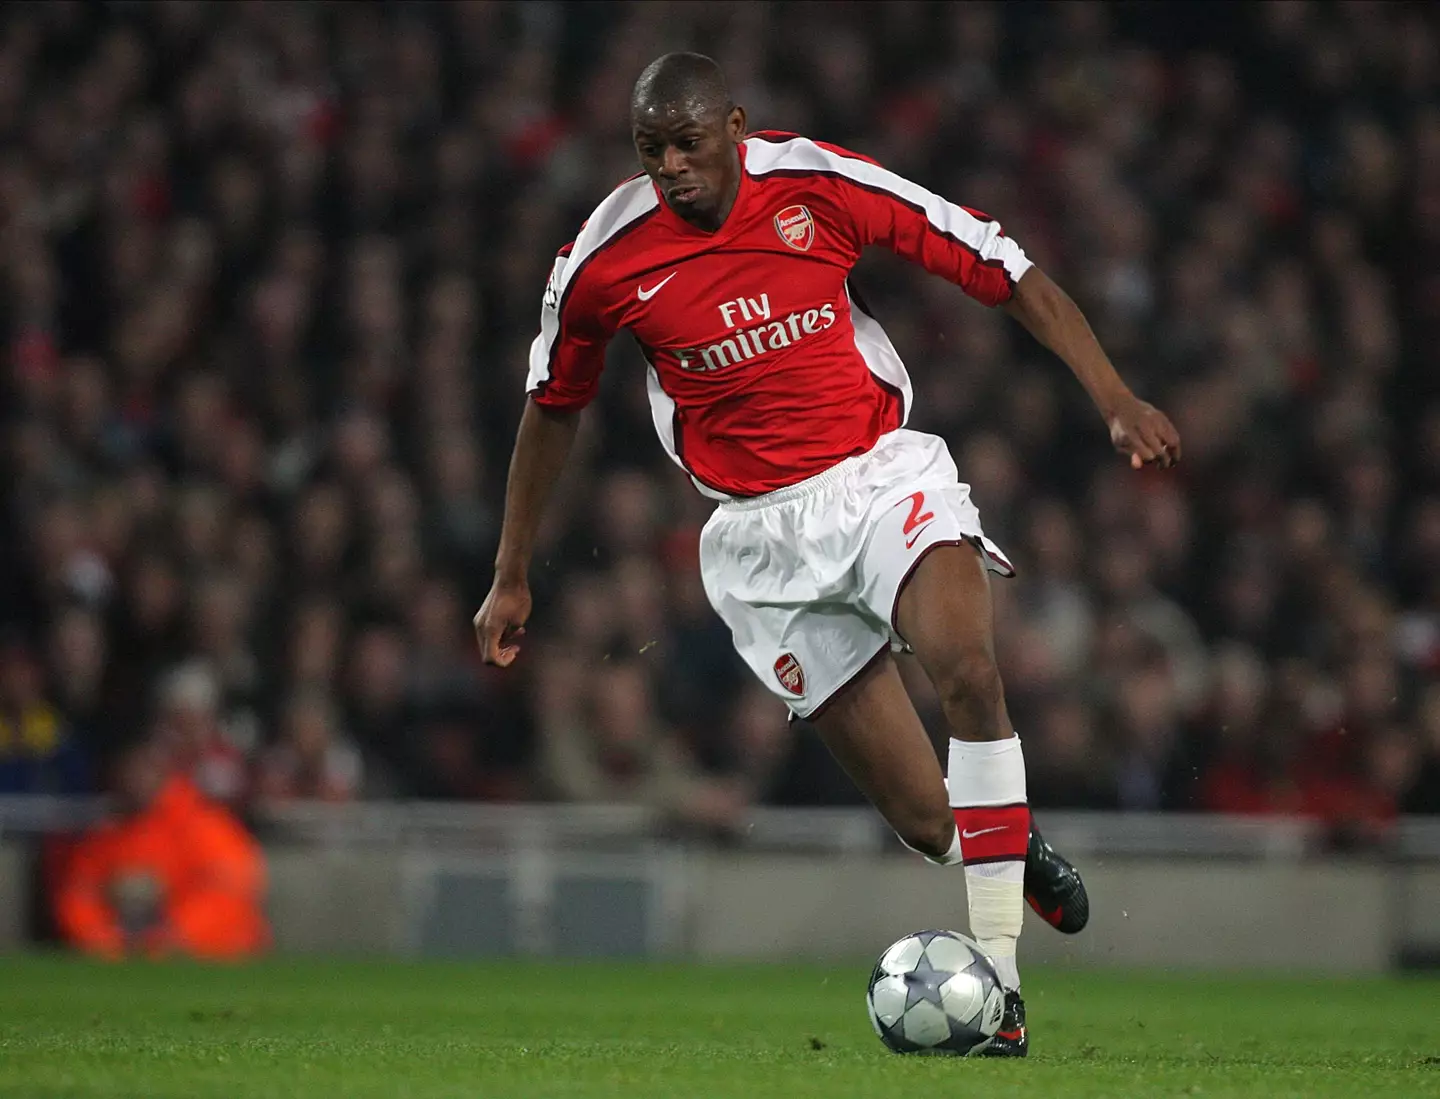 Abou Diaby suffered multiple injury problems during his career. Image